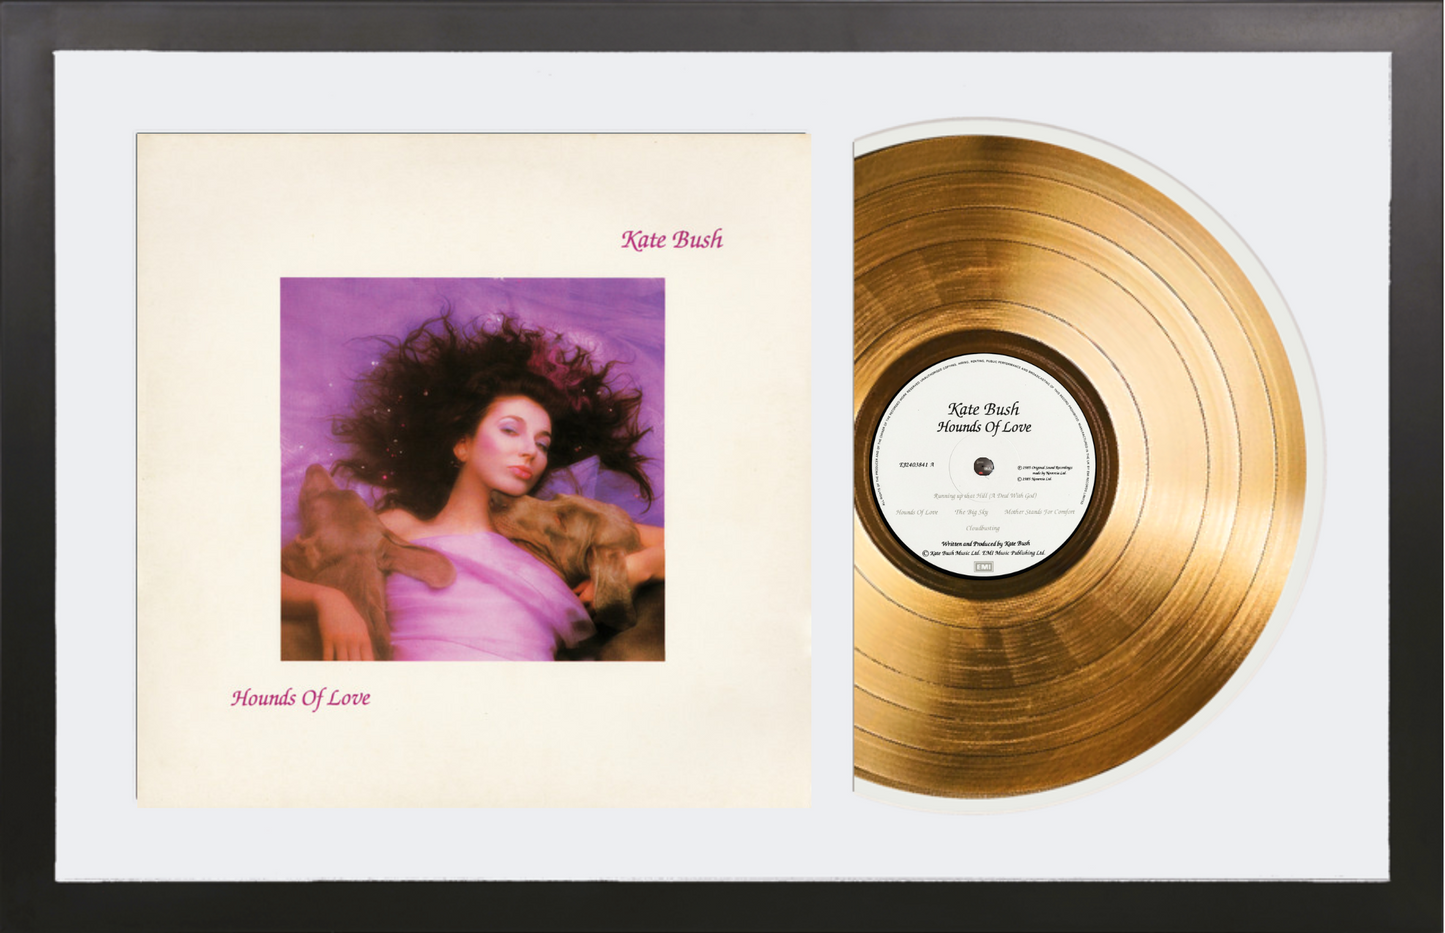 Kate Bush - Hounds Of Love - 14K Gold Plated, Limited Edition Album